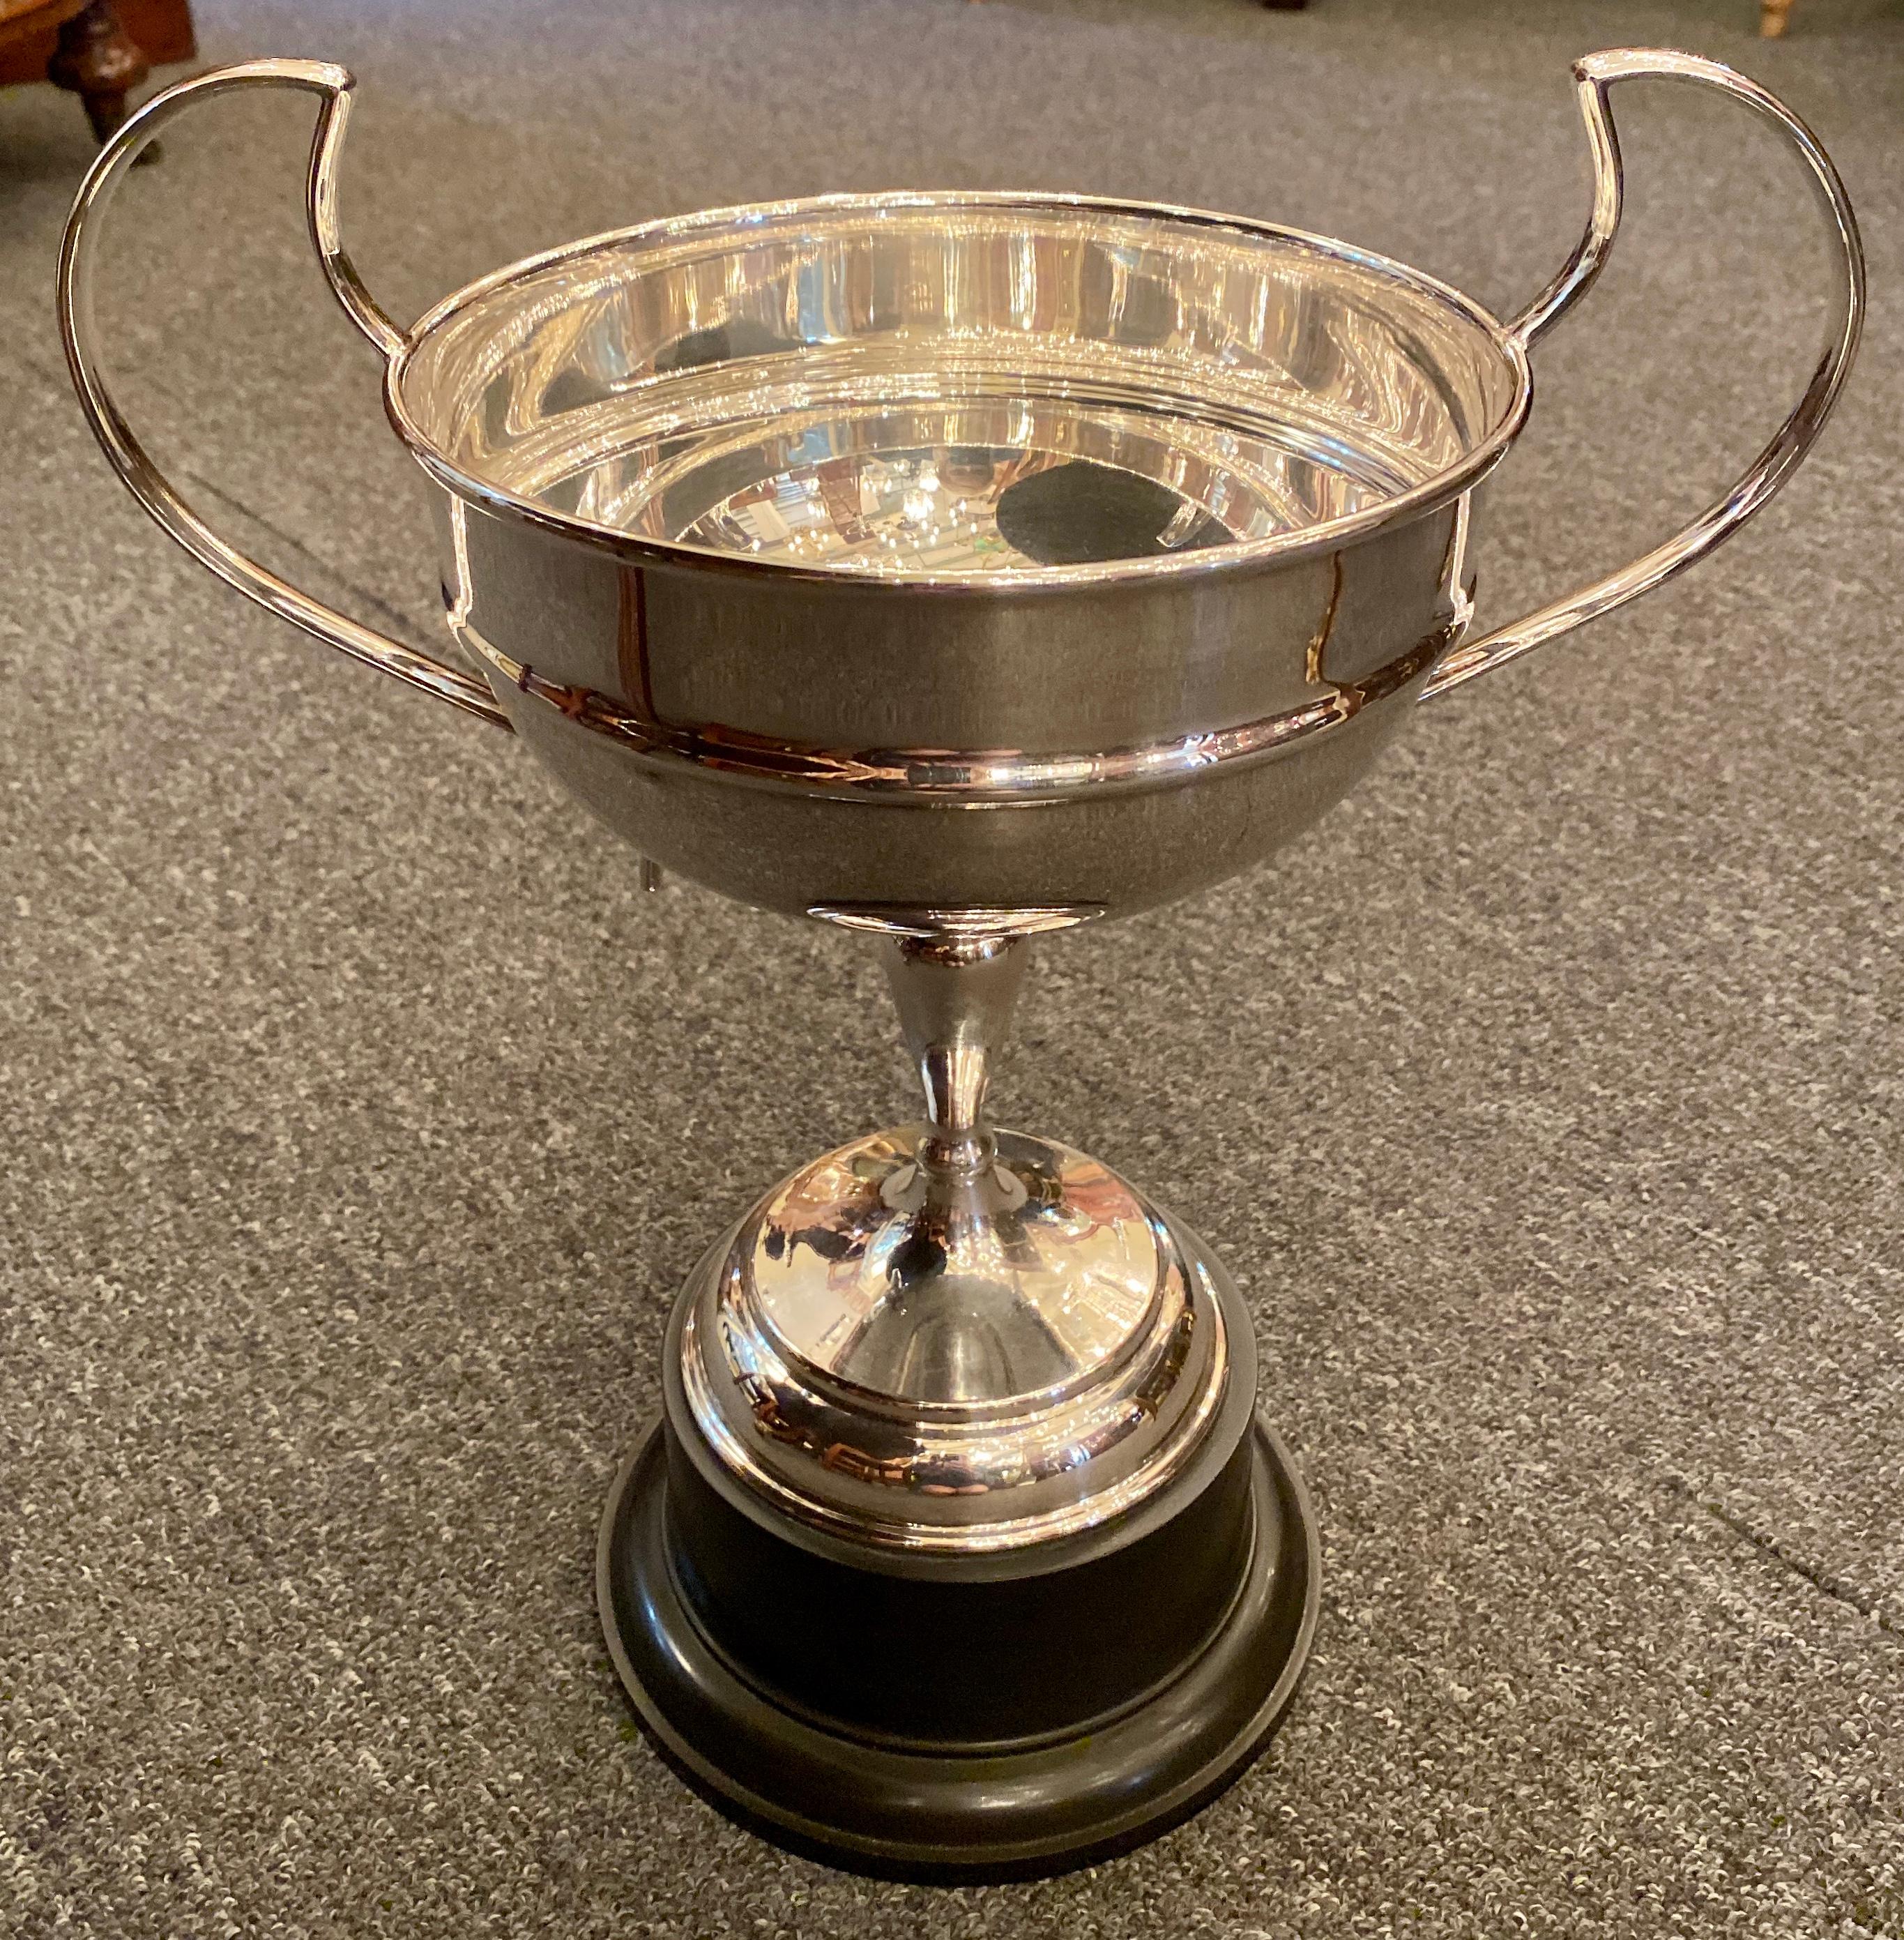 Antique English Sheffield silver plated trophy cup circa 1920. Made in England and includes Hallmarks.